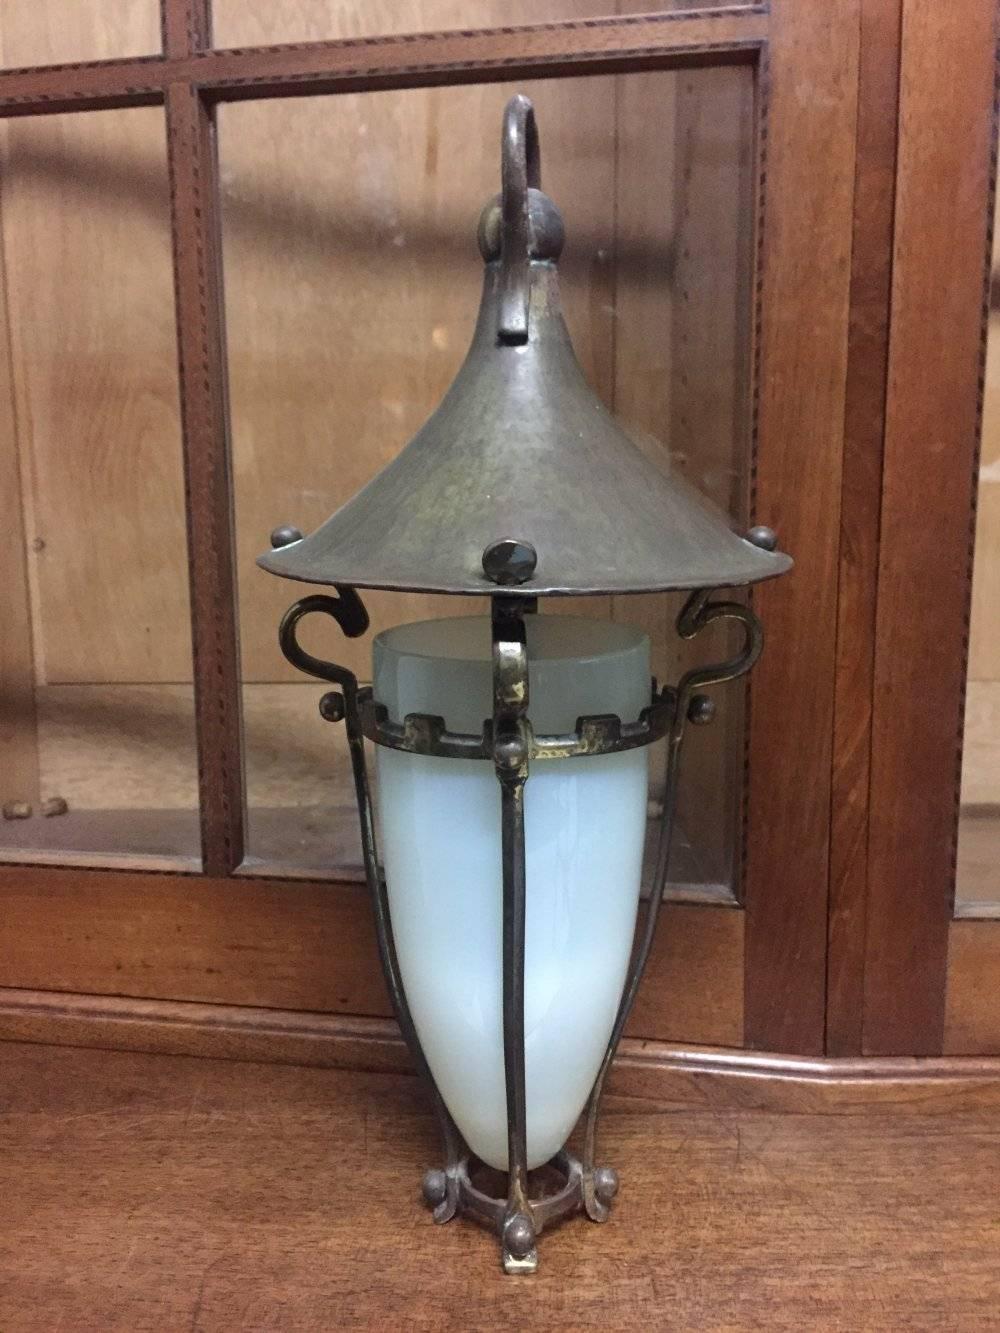 Birmingham Guild of Handicraft, attributed. A wonderful well designed Arts and Crafts copper and brass conical lantern with a subtle castellated detail below the hat, retaining the original Vaseline/Uranium Glass Shade, with a hand crafted lock and